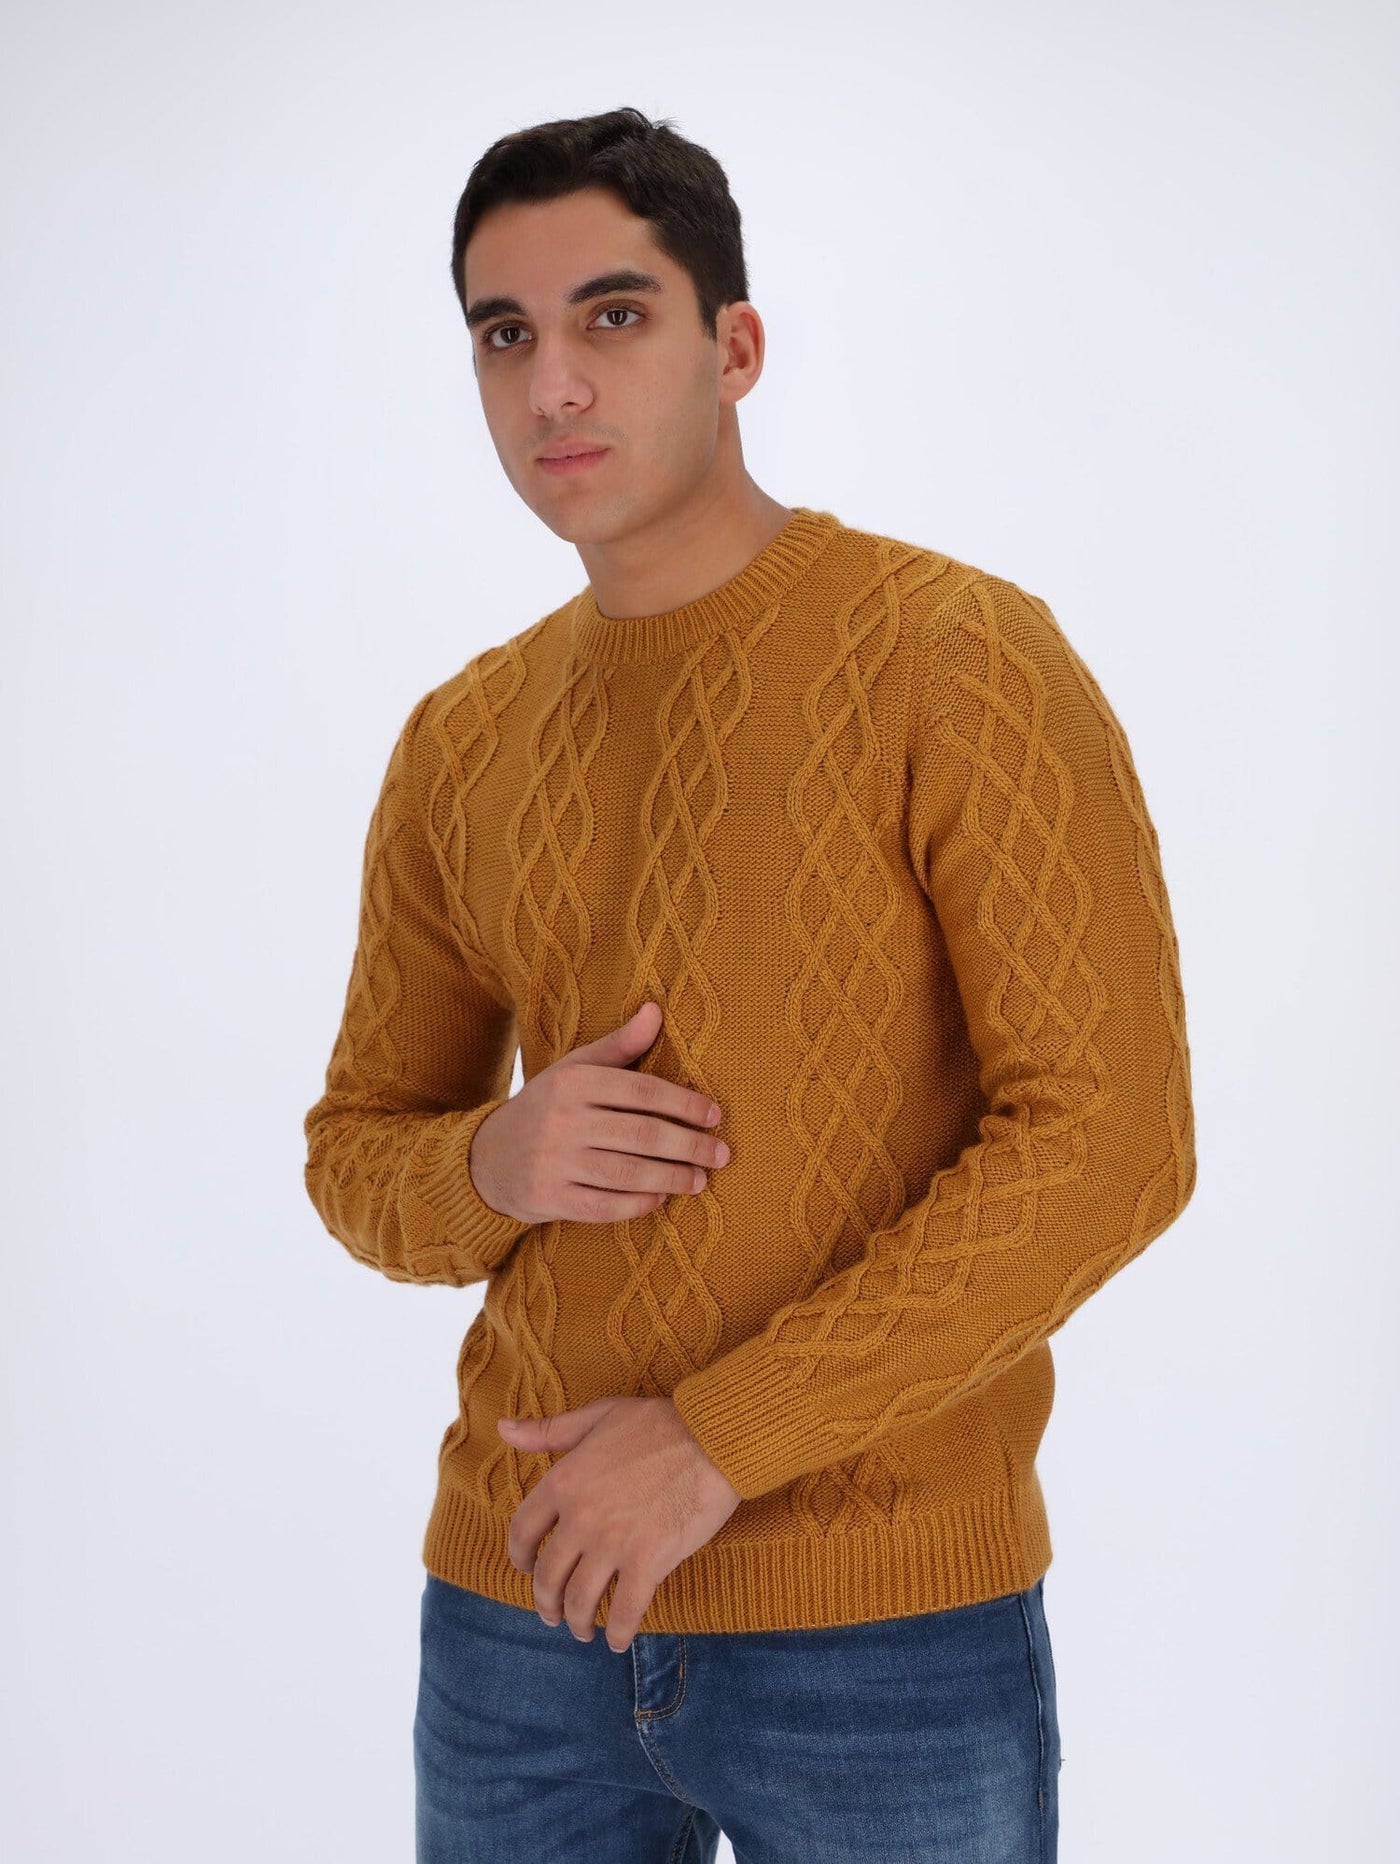 OR Knitwear XL / YELLOW Knitted Sweater with Braided Texture